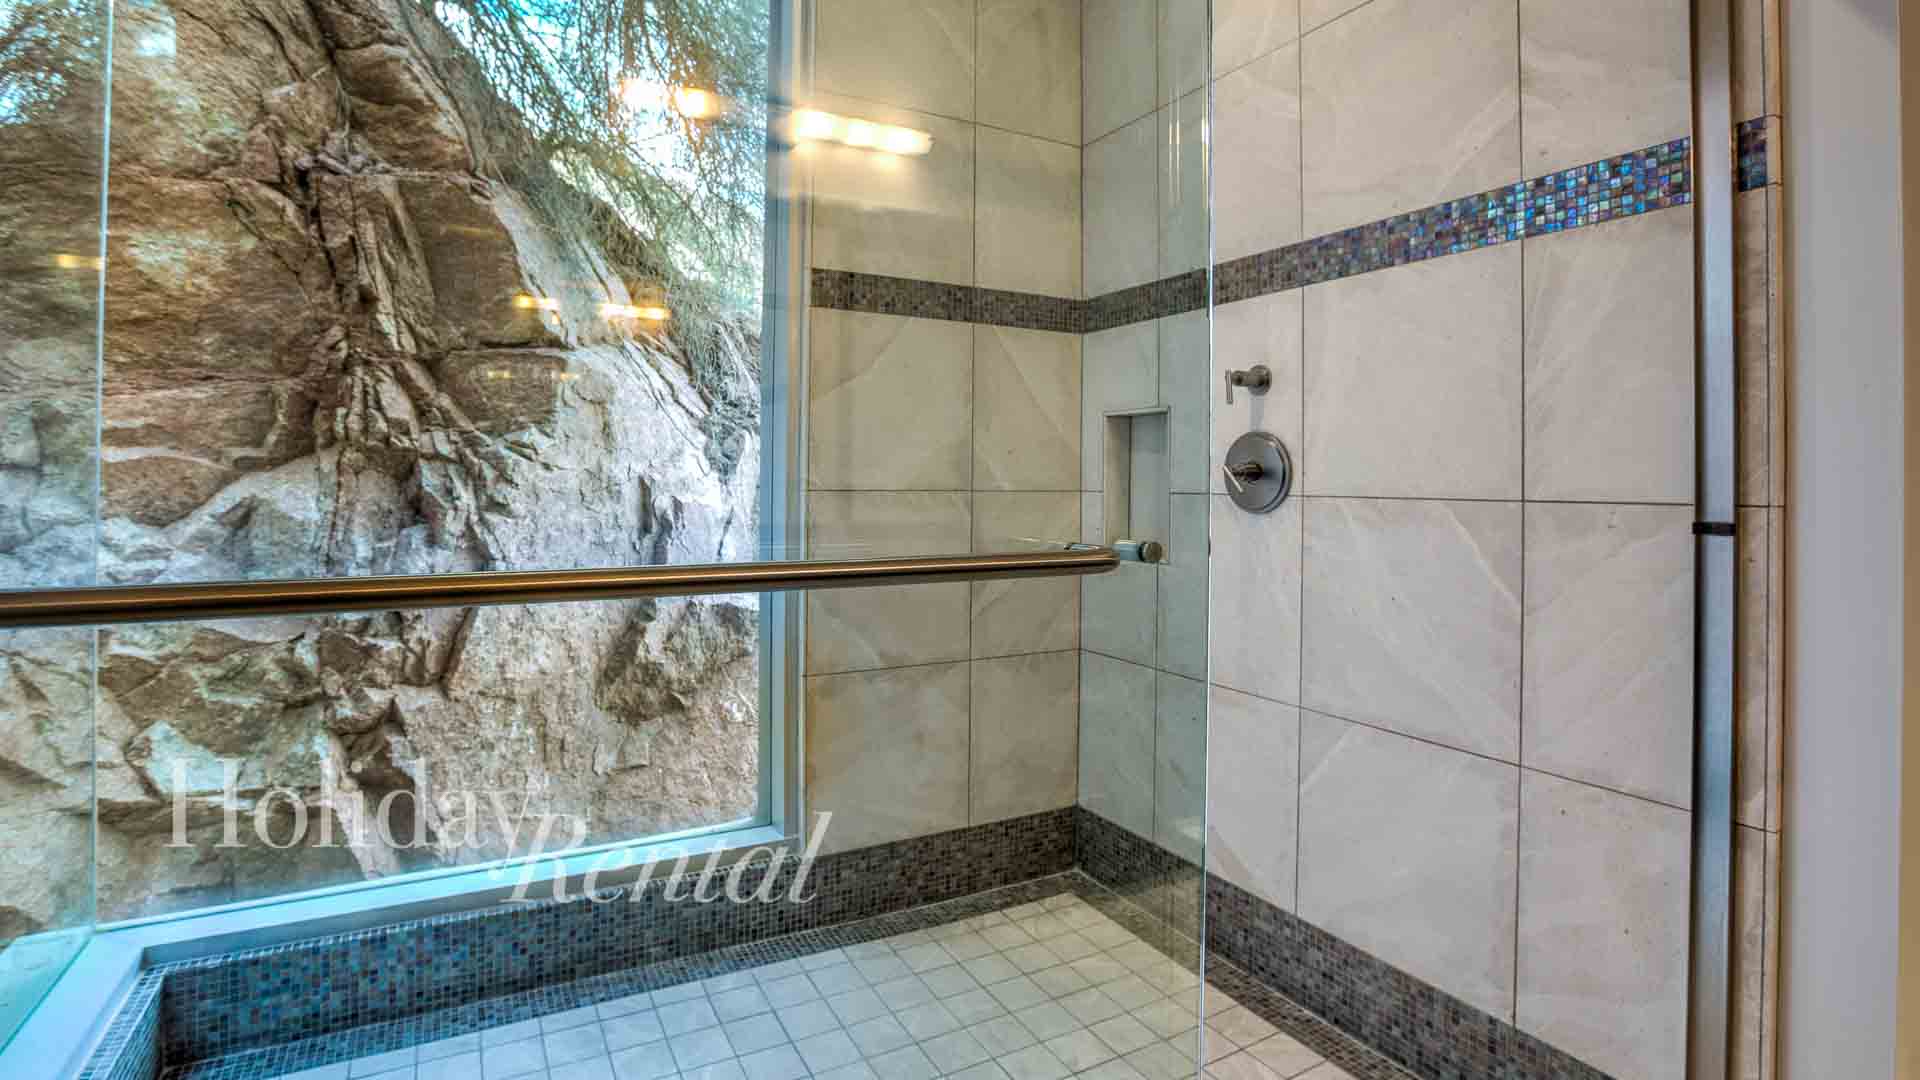 Full Bathroom with shower in the rocks